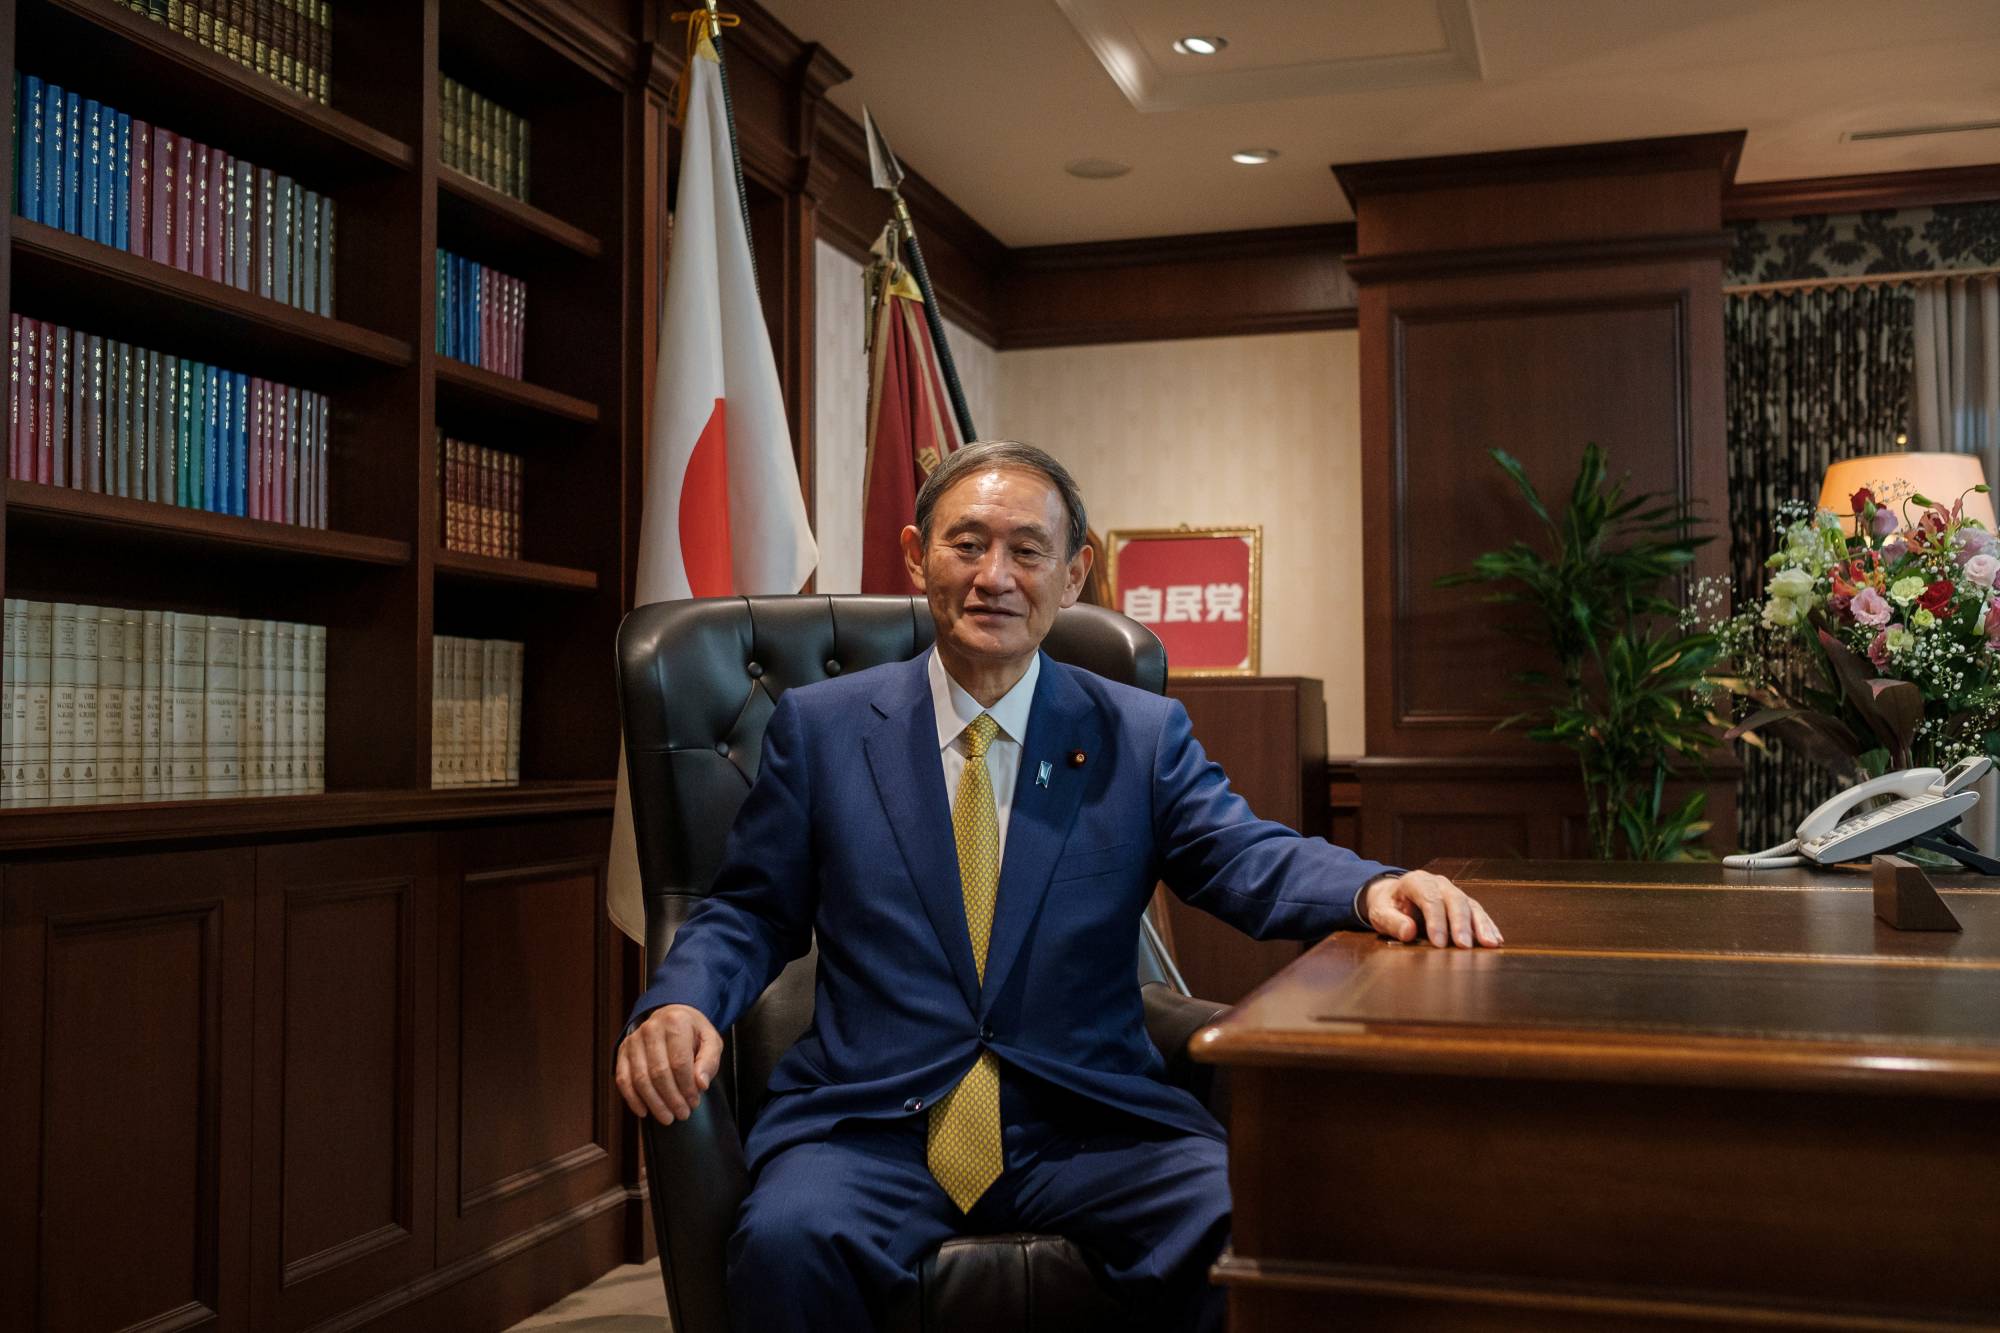 Newly elected Liberal Democratic Party chief Yoshihide Suga poses for a picture following a news conference at LDP headquarters in Tokyo on Monday. | POOL / VIA REUTERS